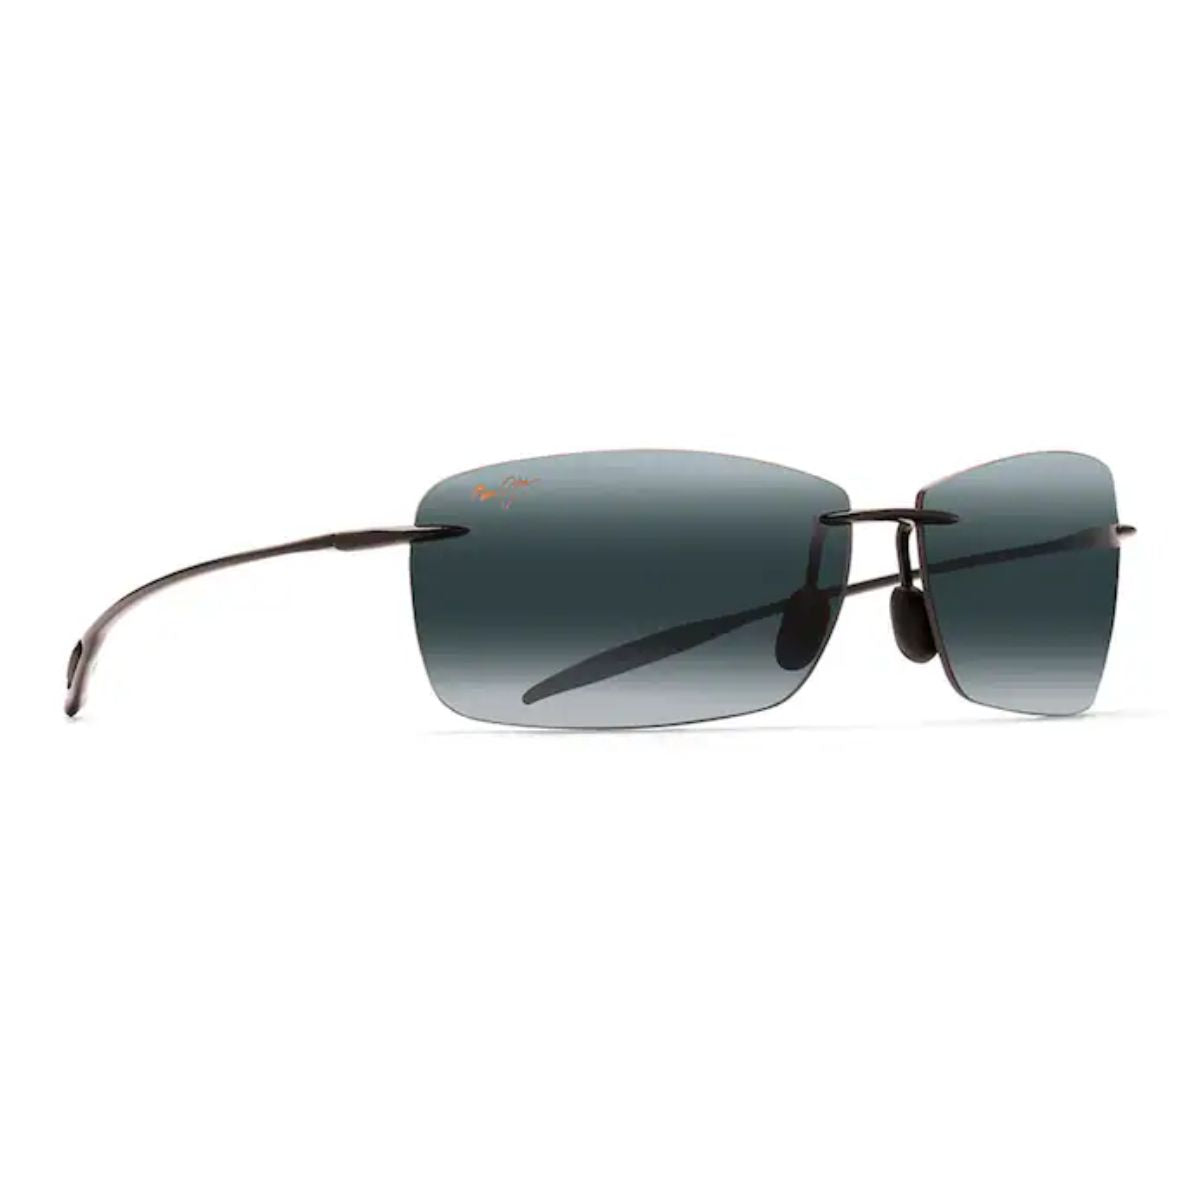 "Buy Stylish Maui Jim Polarized Sunglasses For Men's At Optorium Online Store | Free Shipping All Over Inida"